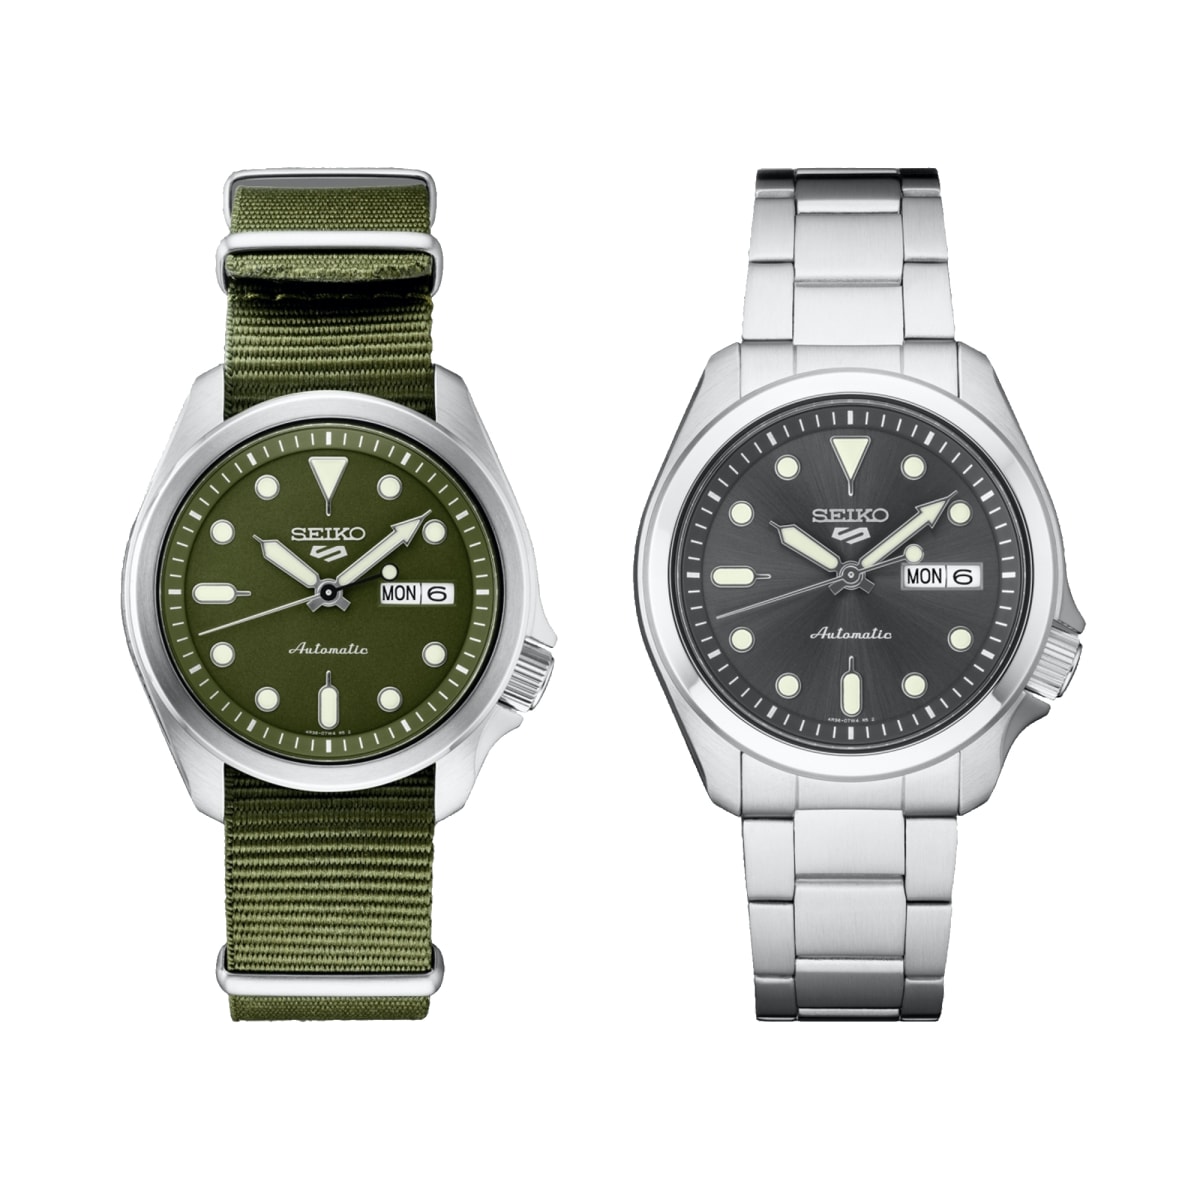 Seiko expands its Seiko 5 Sports line with a new 40mm model - Acquire